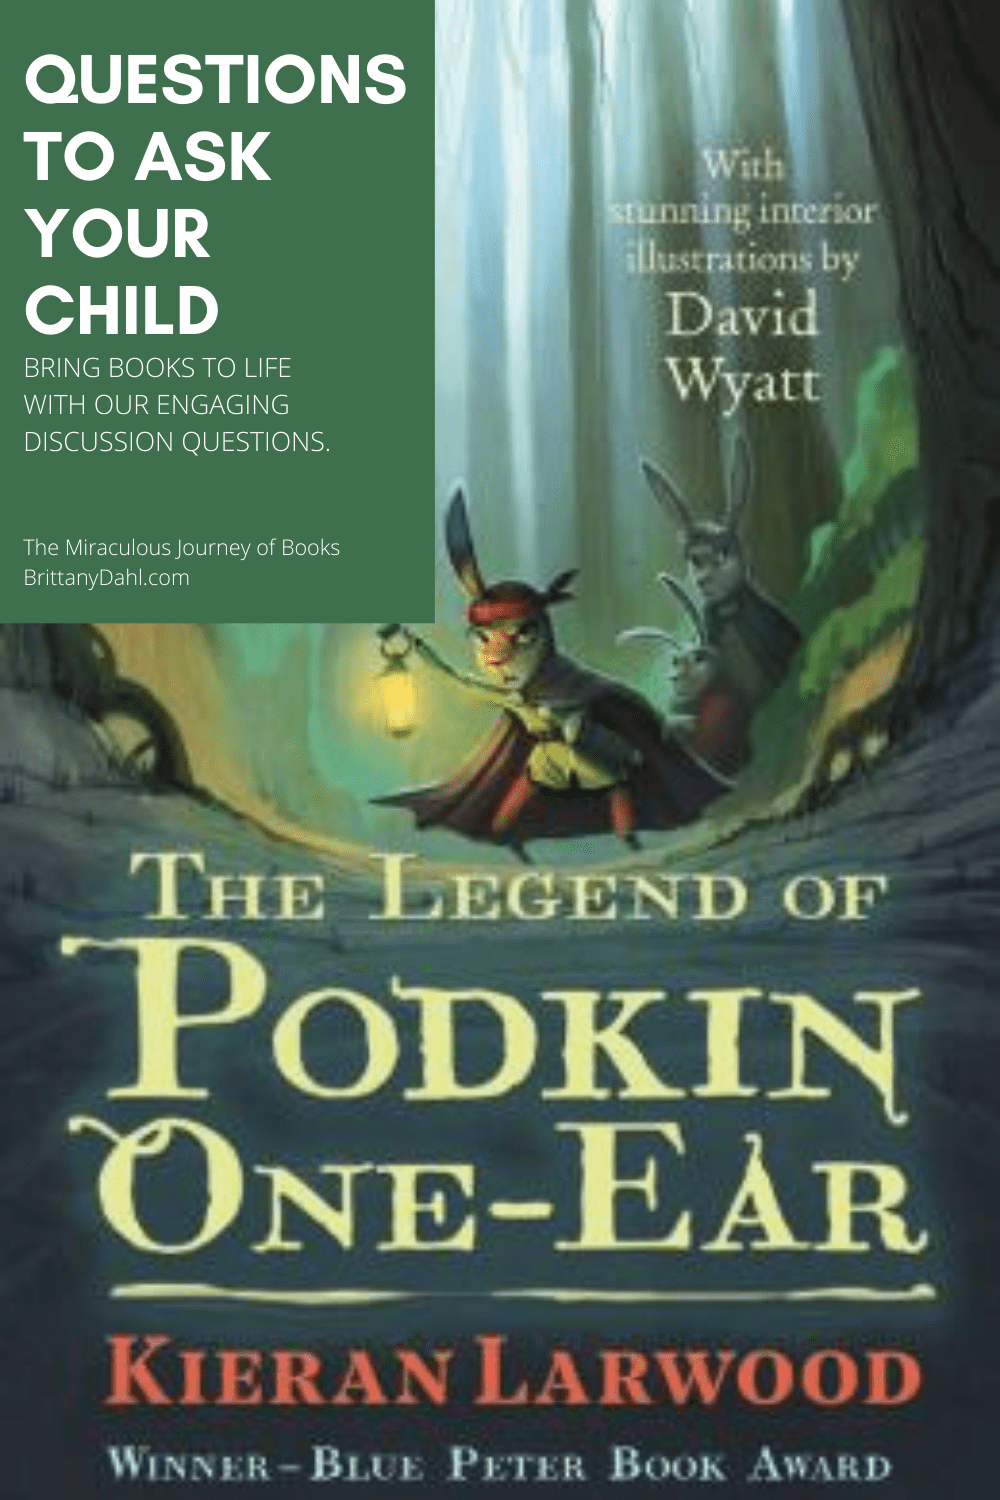 Bring books to life with engaging discussions questions. The Legeld of Podkin One-Ear. Includes great questions to ask your child. The Miraculous Journey of Books at Brittanydahl.com